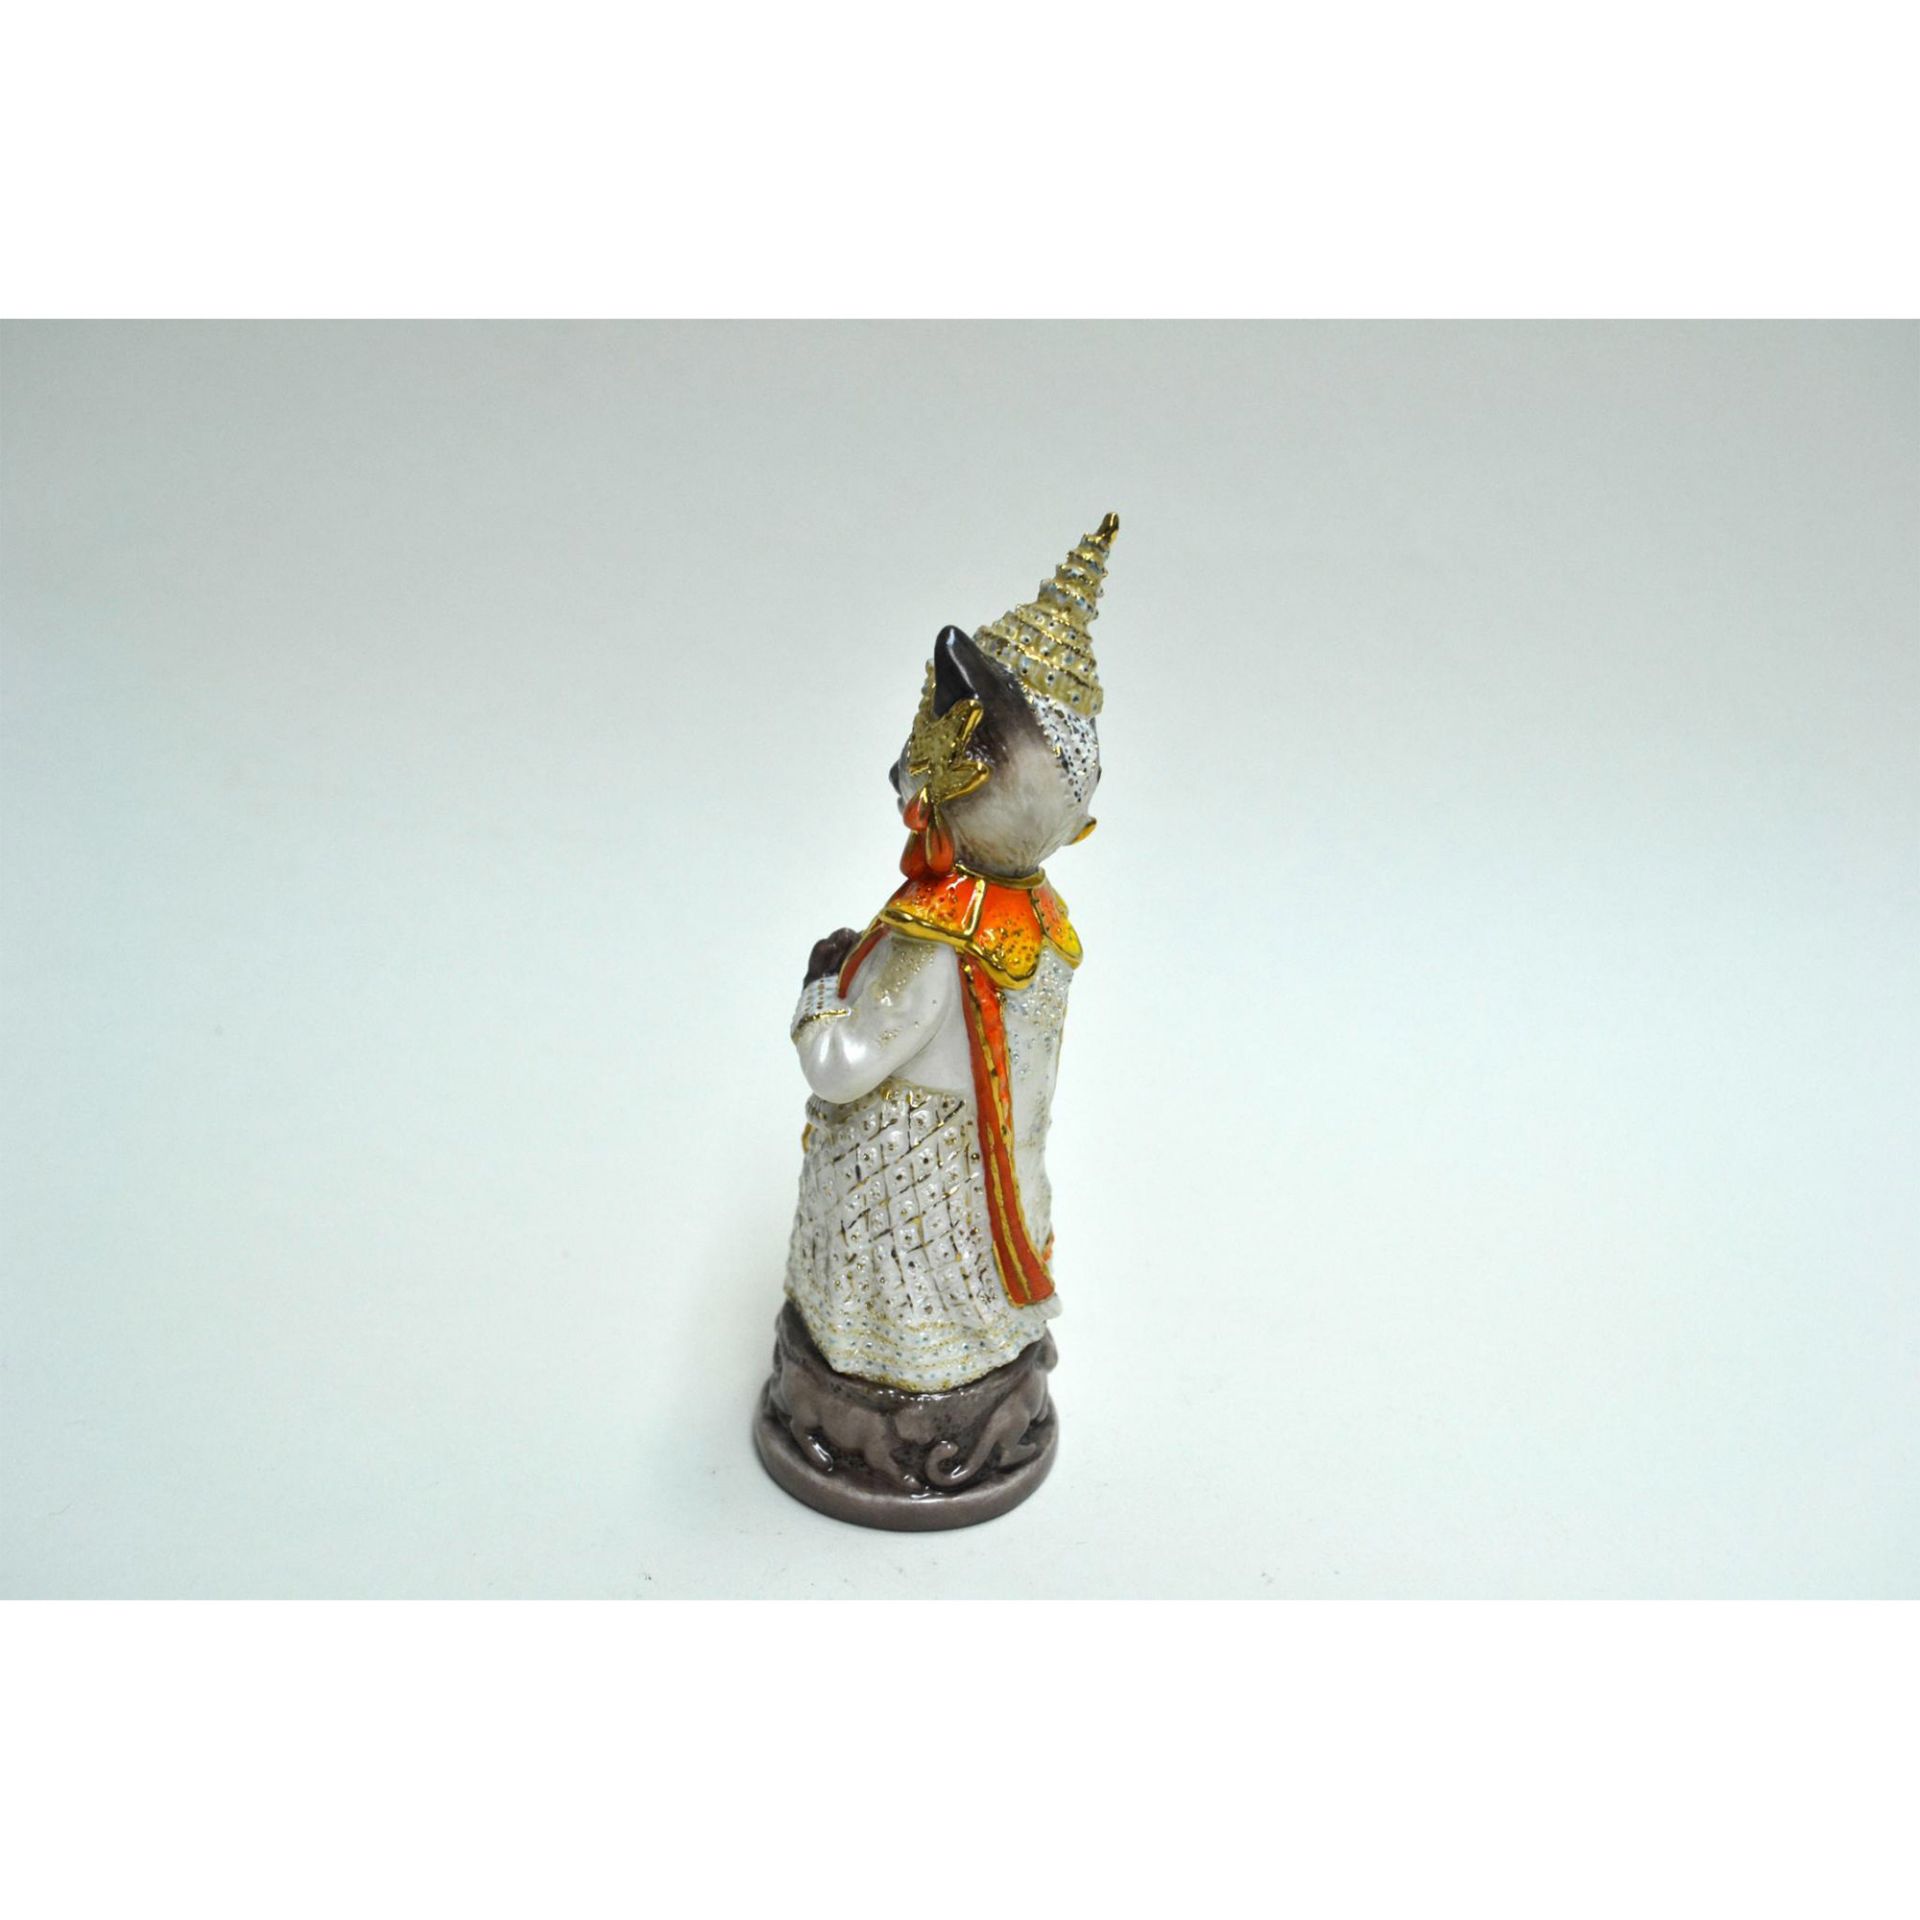 Bronte Porcelain Siamese Cat Candle Extinguisher - Image 6 of 6